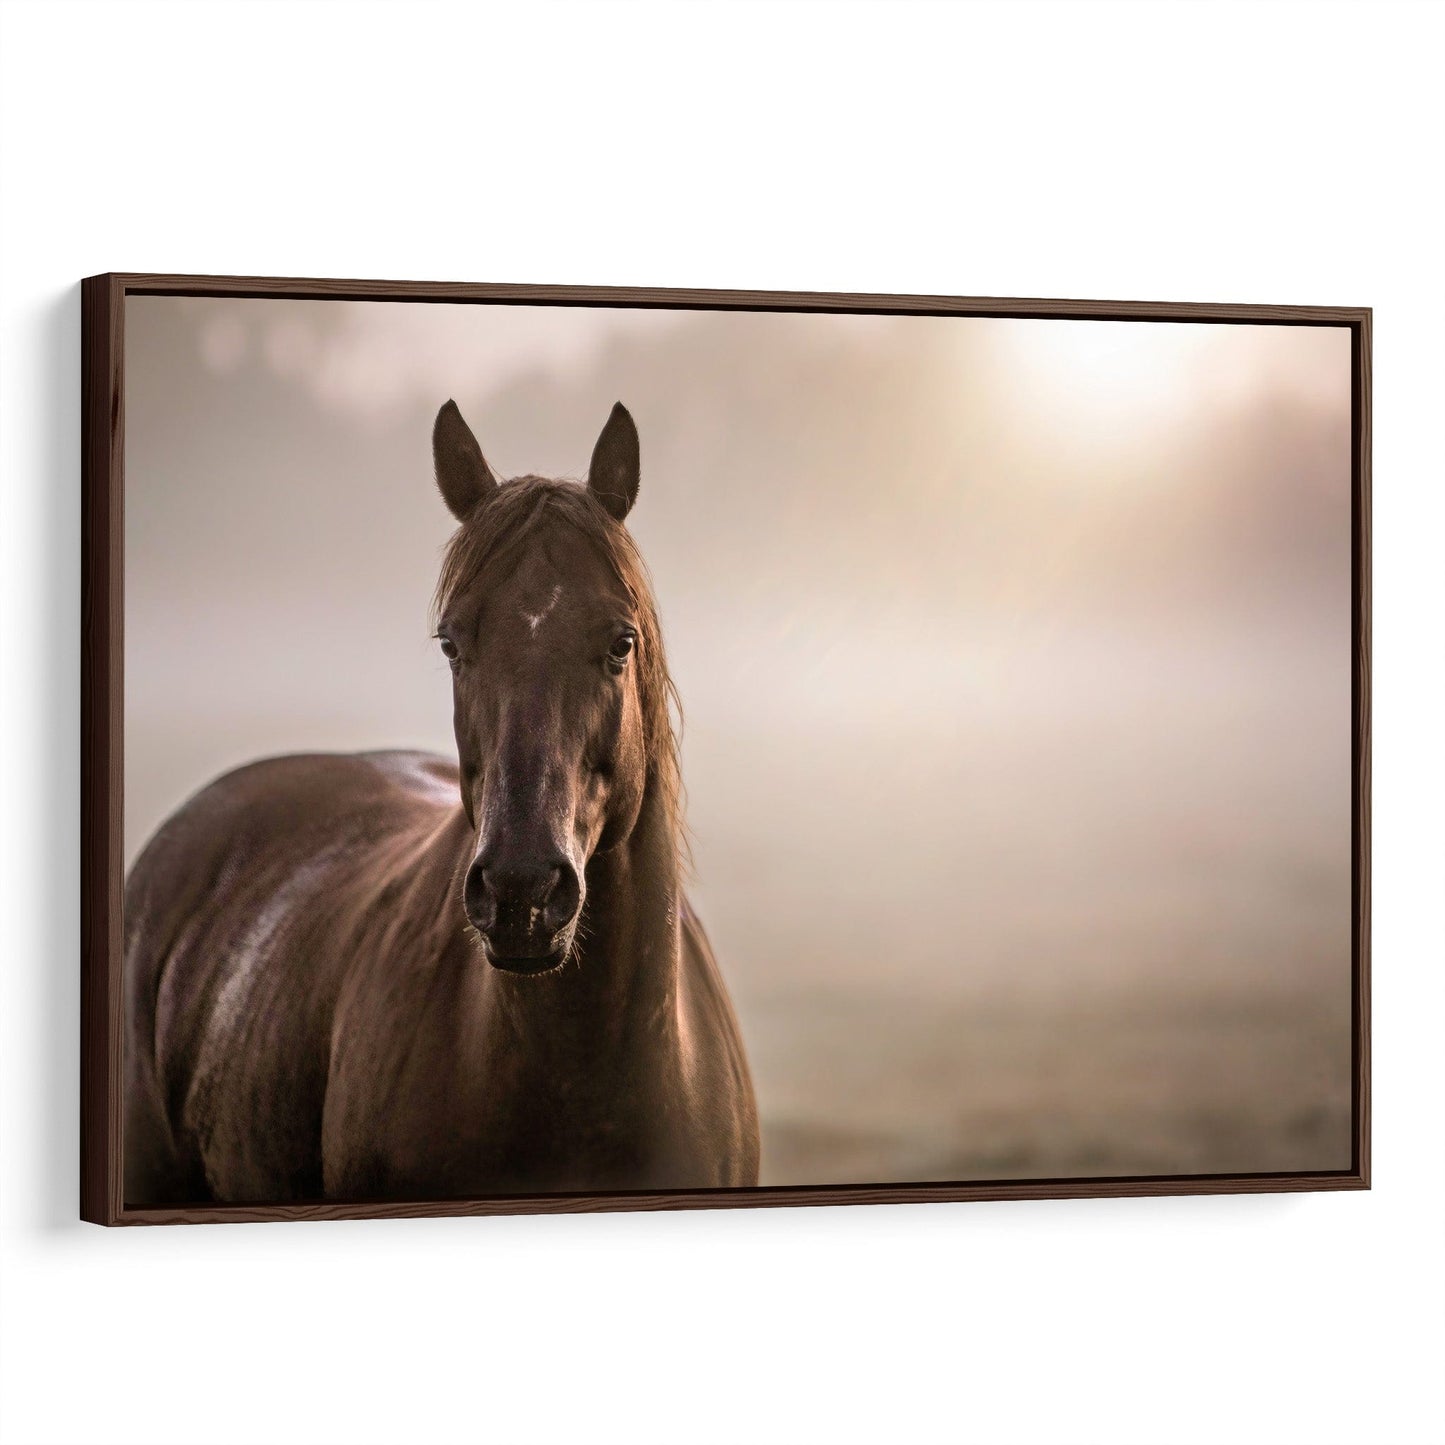 Horse Decor Canvas Print - Horse in Foggy Pasture Canvas-Walnut Frame / 12 x 18 Inches Wall Art Teri James Photography